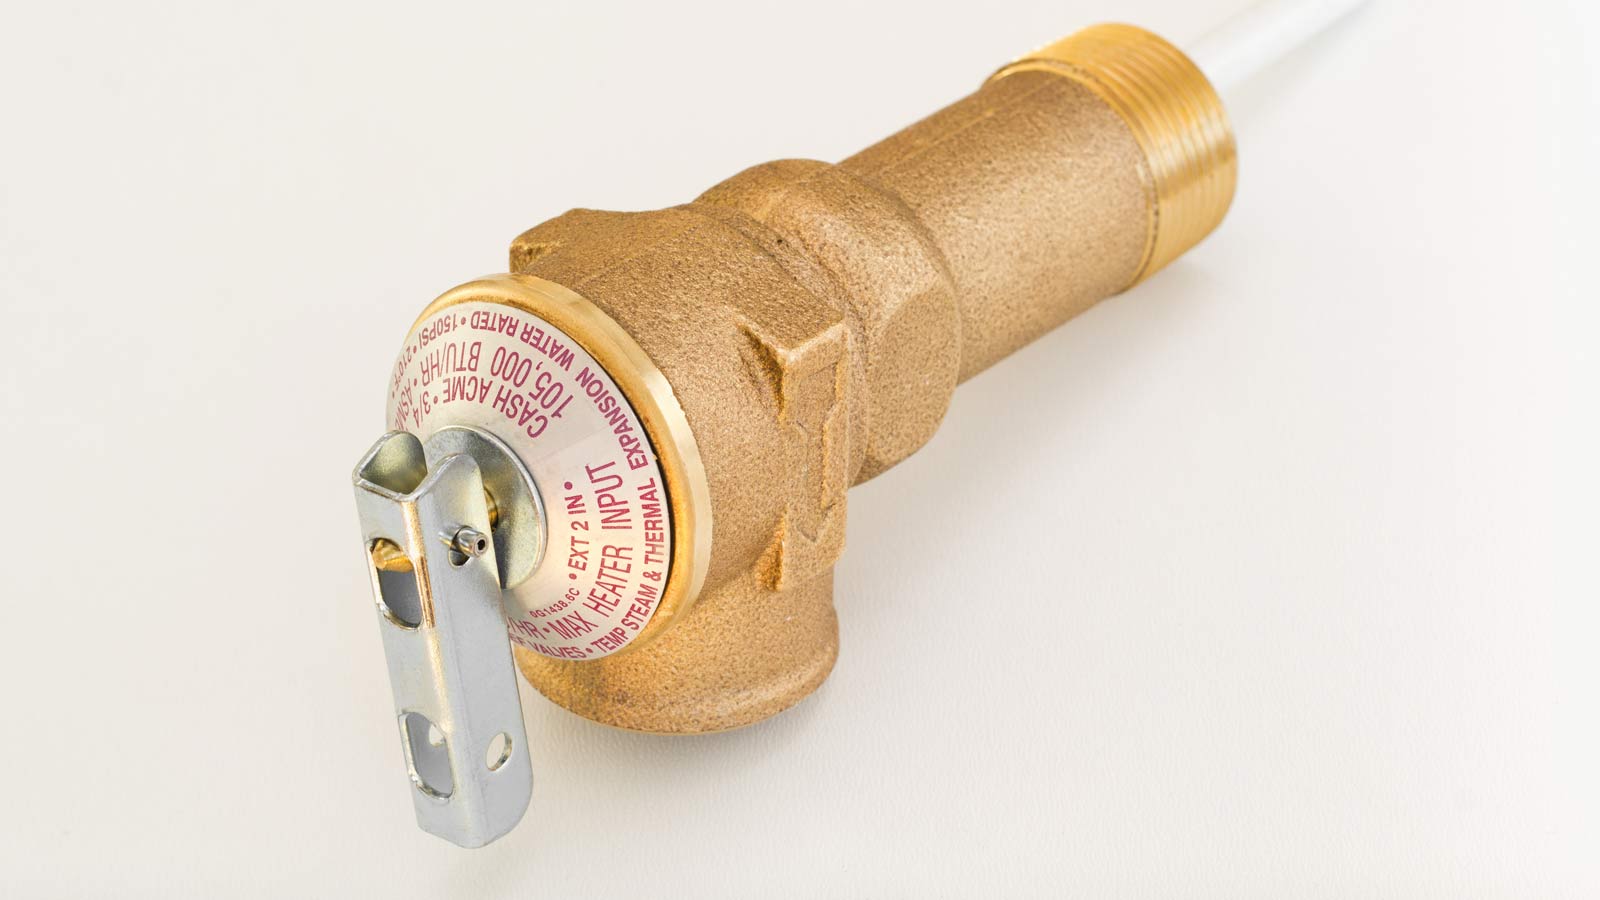 What Causes A Hot Water Heater To Leak From The Pressure Relief Valve